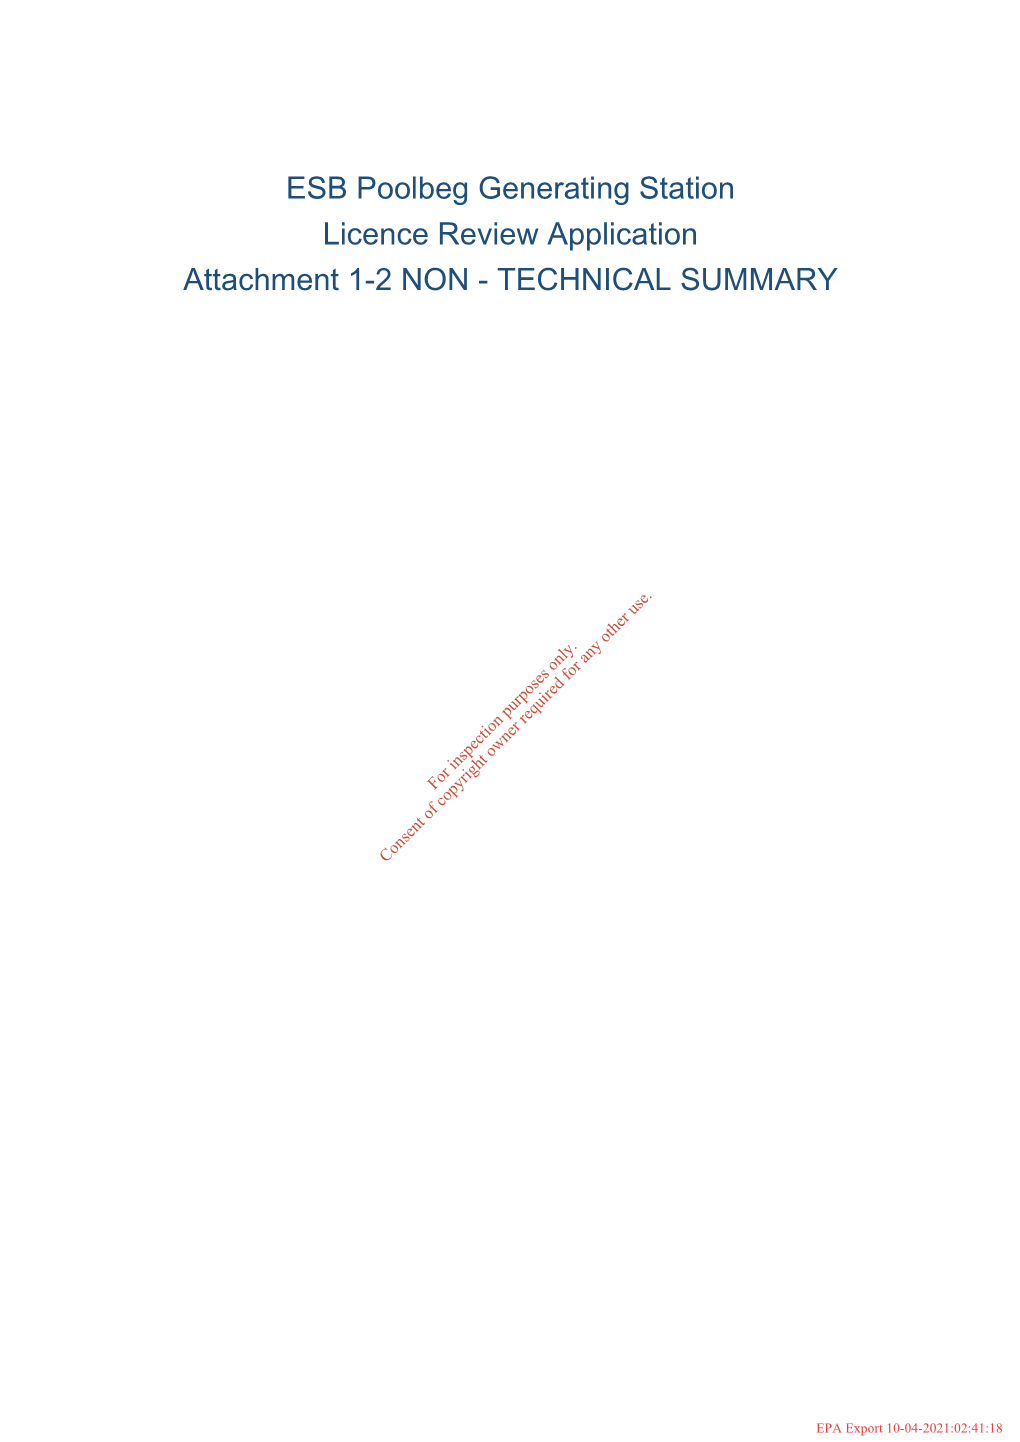 ESB Poolbeg Generating Station Licence Review Application Attachment 1-2 NON - TECHNICAL SUMMARY